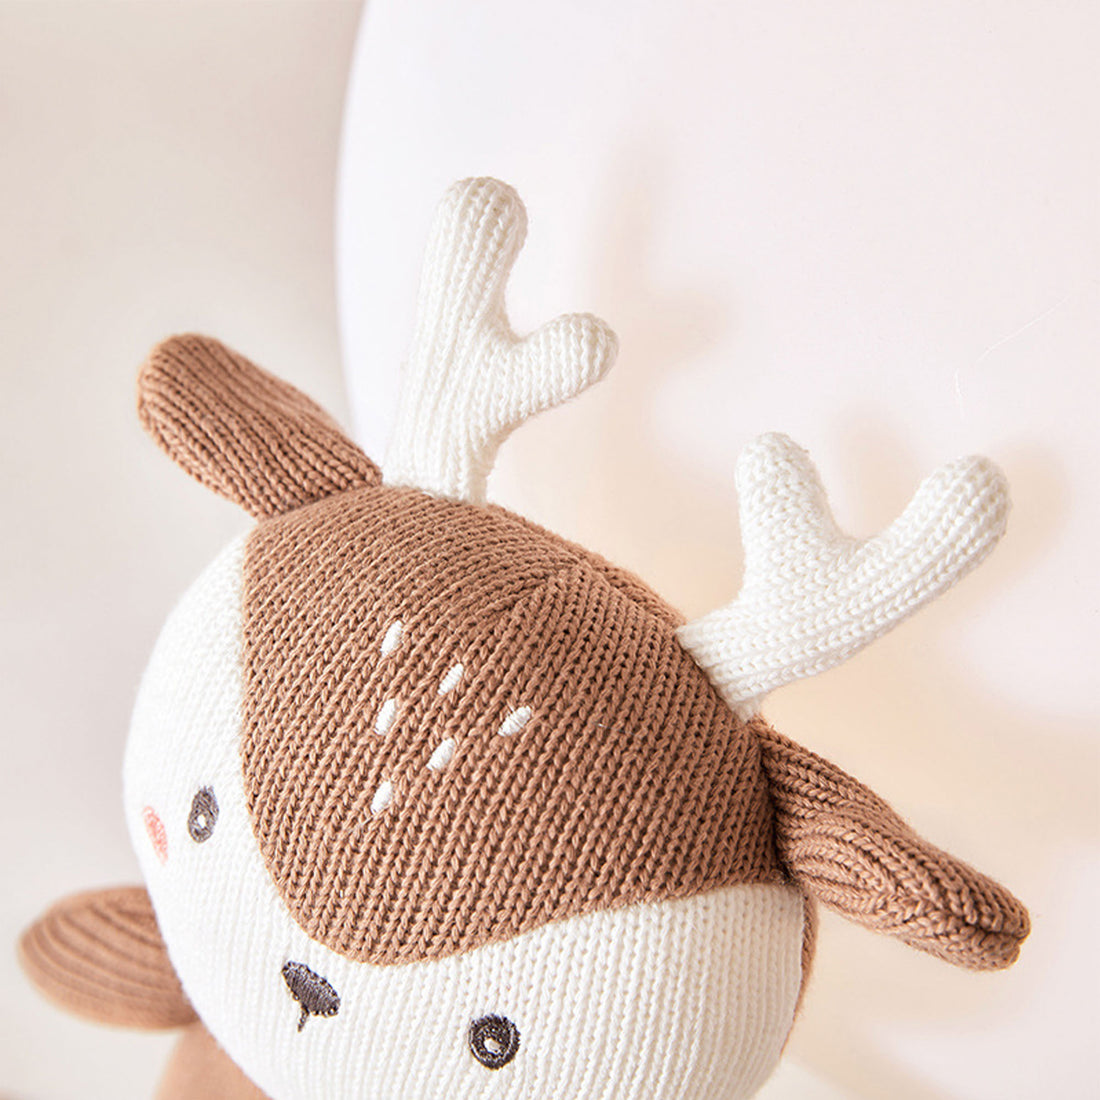 A close-up photo of a stuffed animal with white antlers. The stuffed animal appears to be a deer with brown fur and a white belly. It is sitting on a white background.